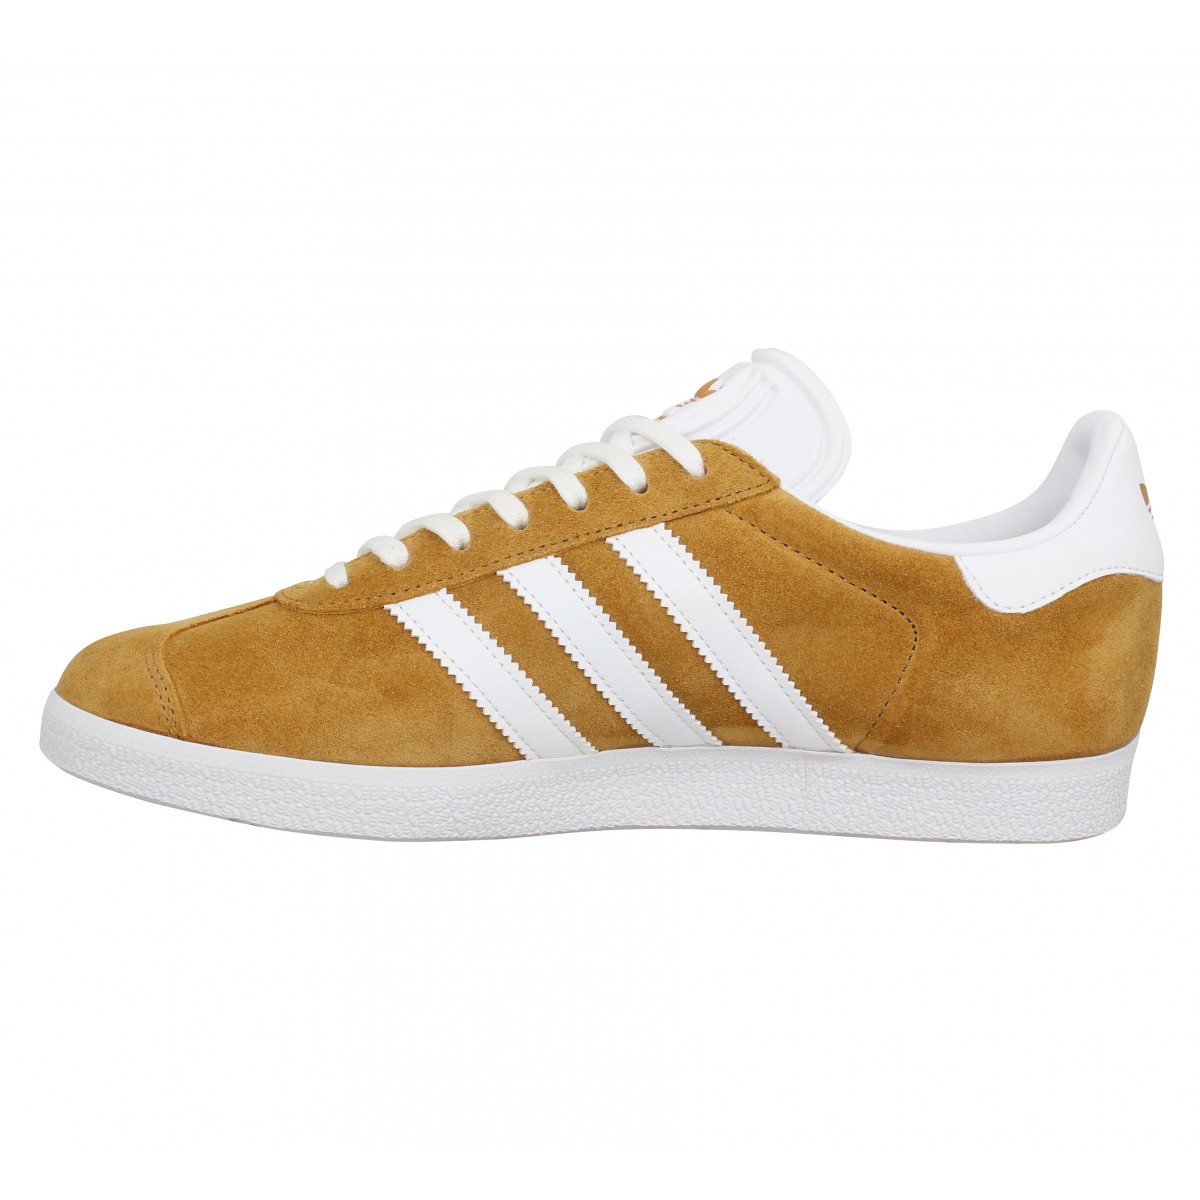 Chaussures Adidas gazelle velours ocre femme homme | Fanny chaussures